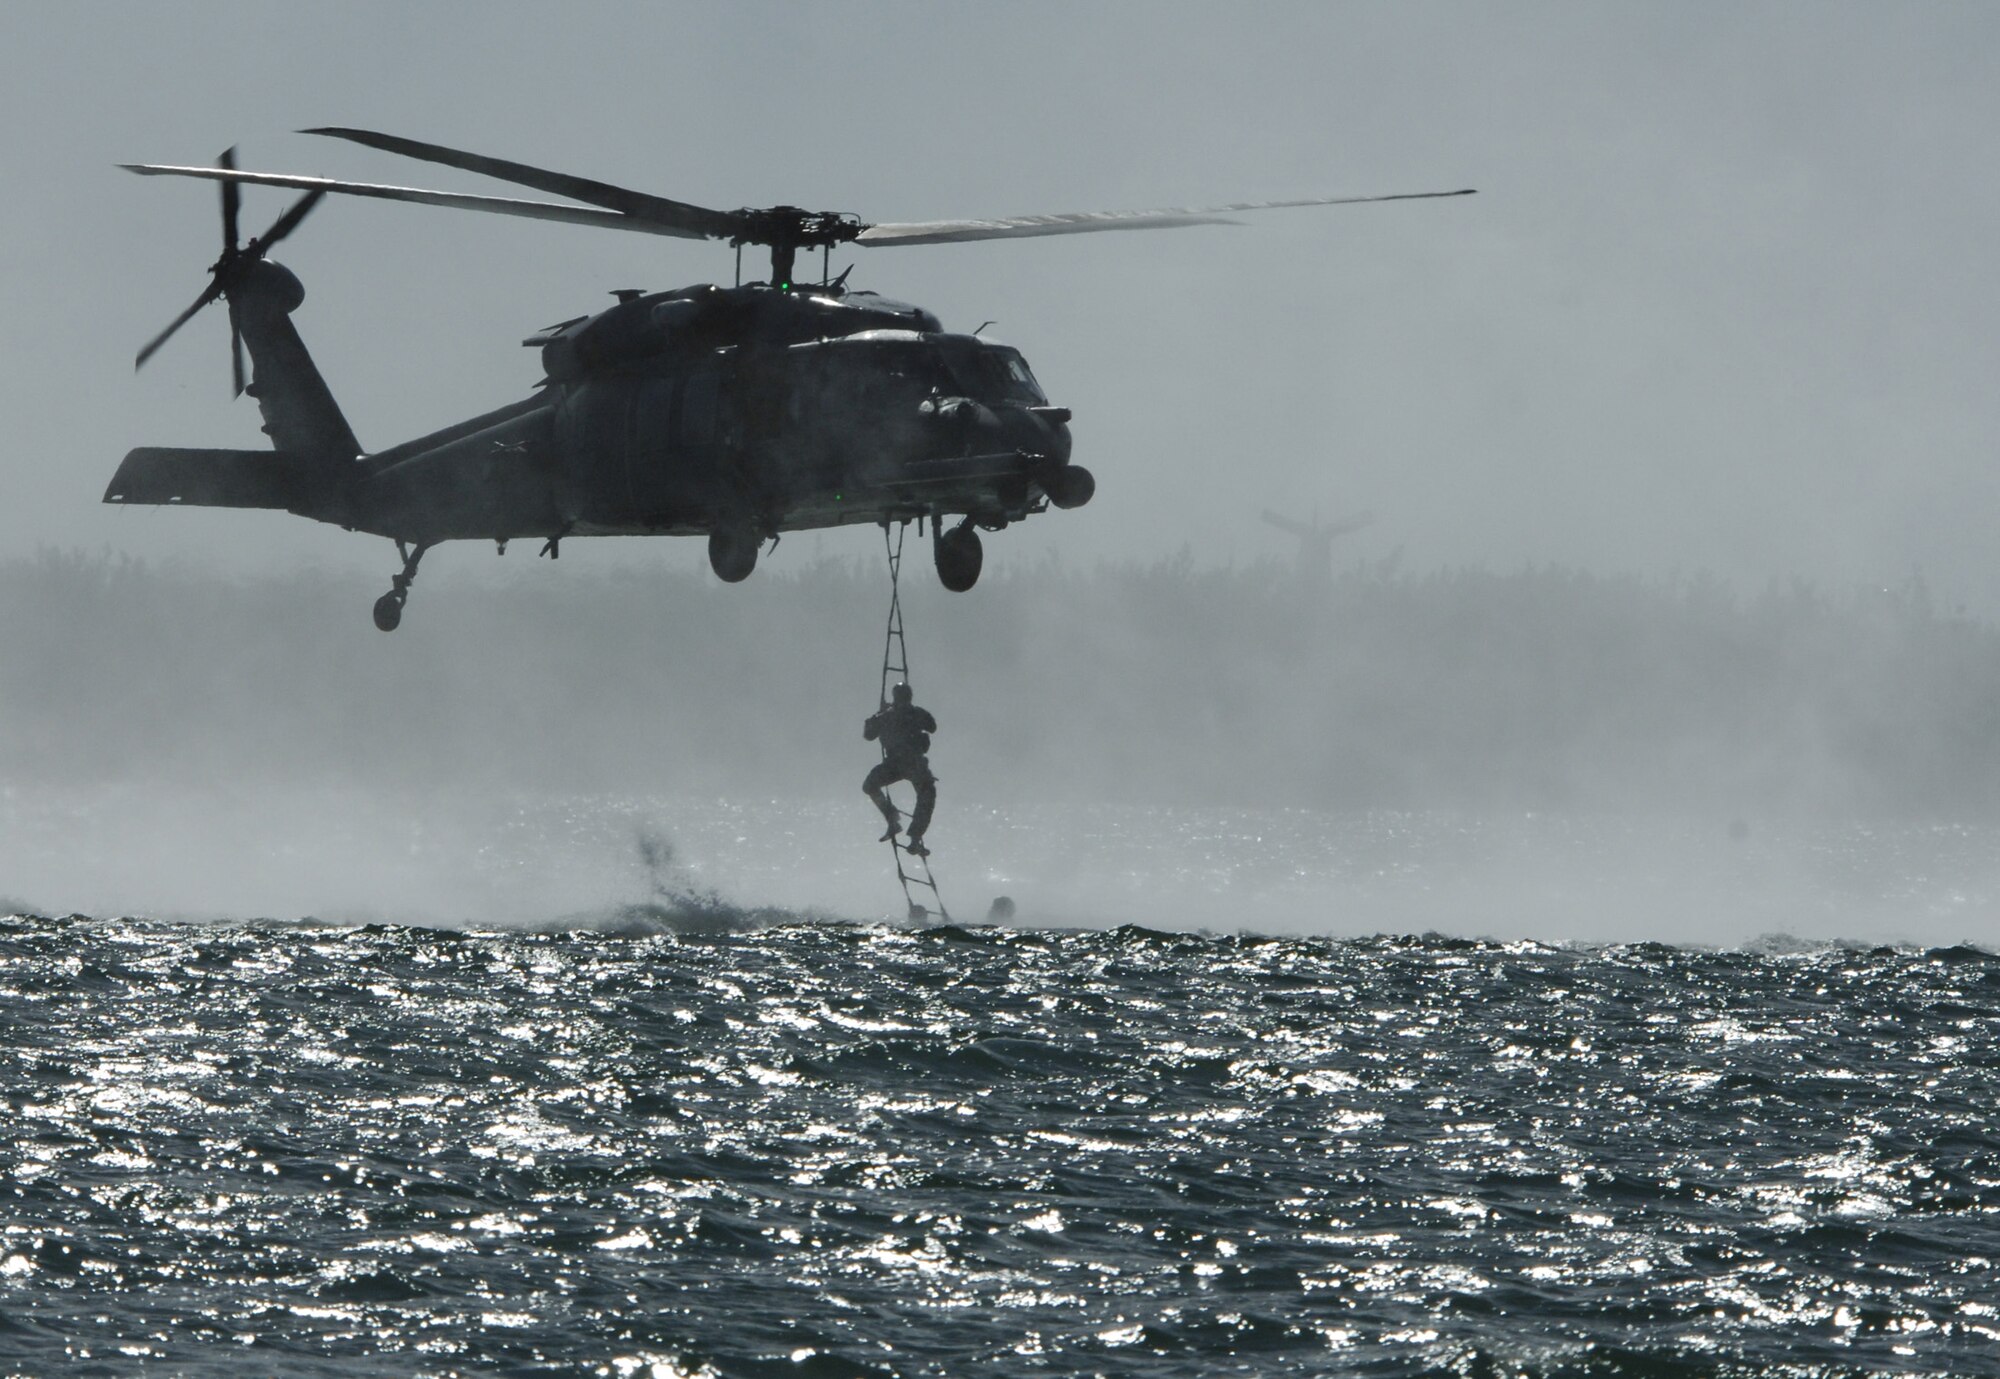 An HH-60G Pave Hawk from the 41st Rescue Squadron hovers over a target area before dropping pararescuemen and soldiers during water survial and extraction training Jan. 9 at Key West Naval Air Station, Fla. The 41st and 38th Rescue Squadrons worked with U.S. Army Special Forces to perform several interservice activities. (U.S. Air Force photo by Senior Airman Javier Cruz)